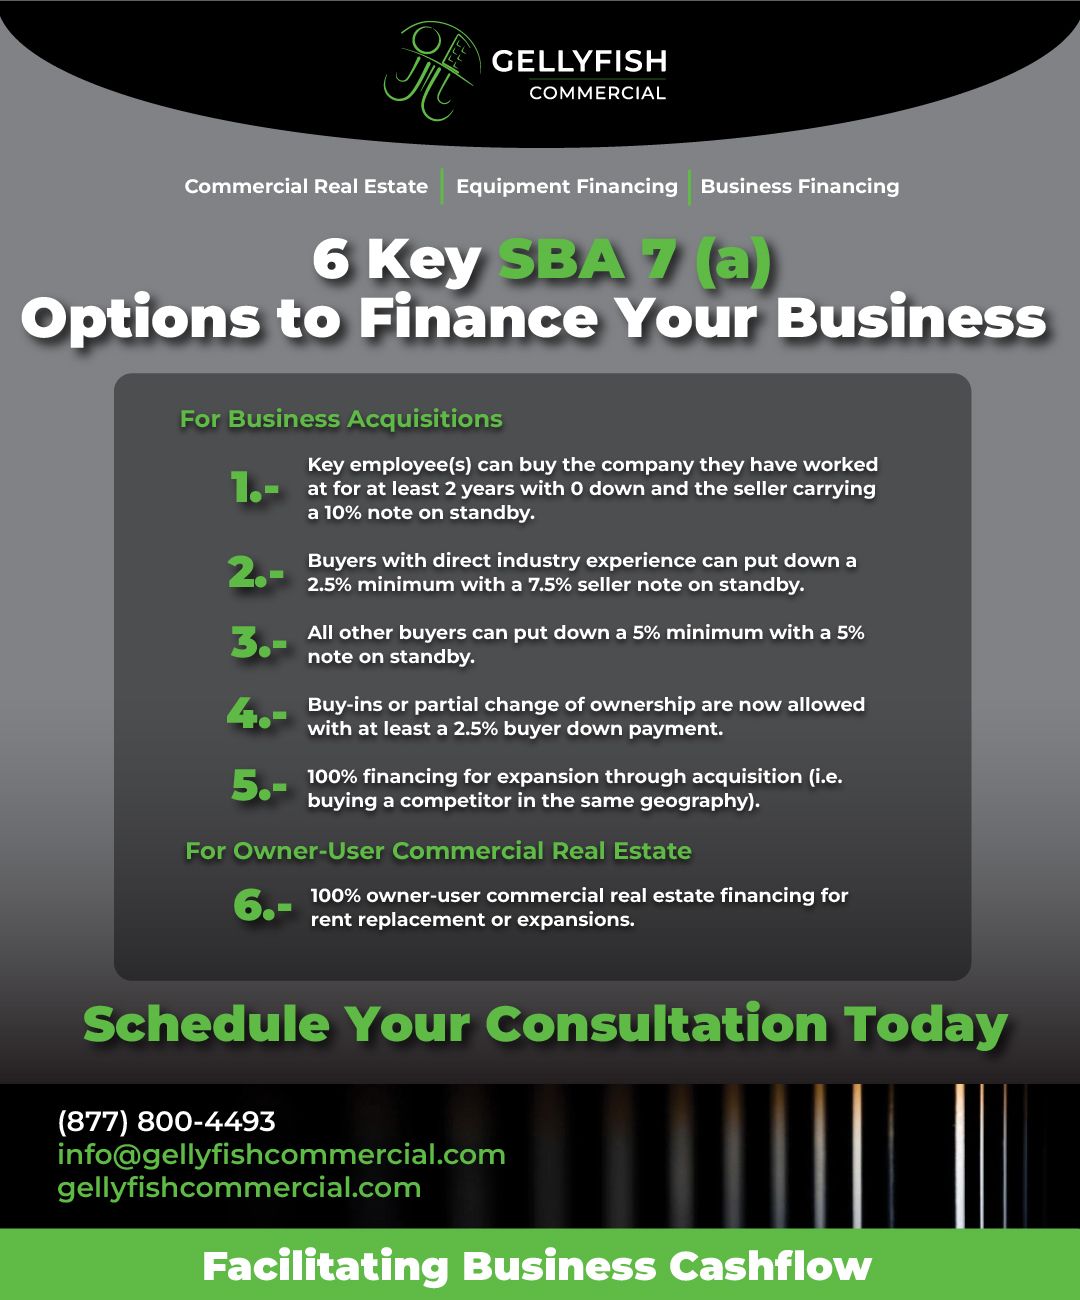 Graphic titled "6 Key SBA 7(a) Options to Finance Your Business"